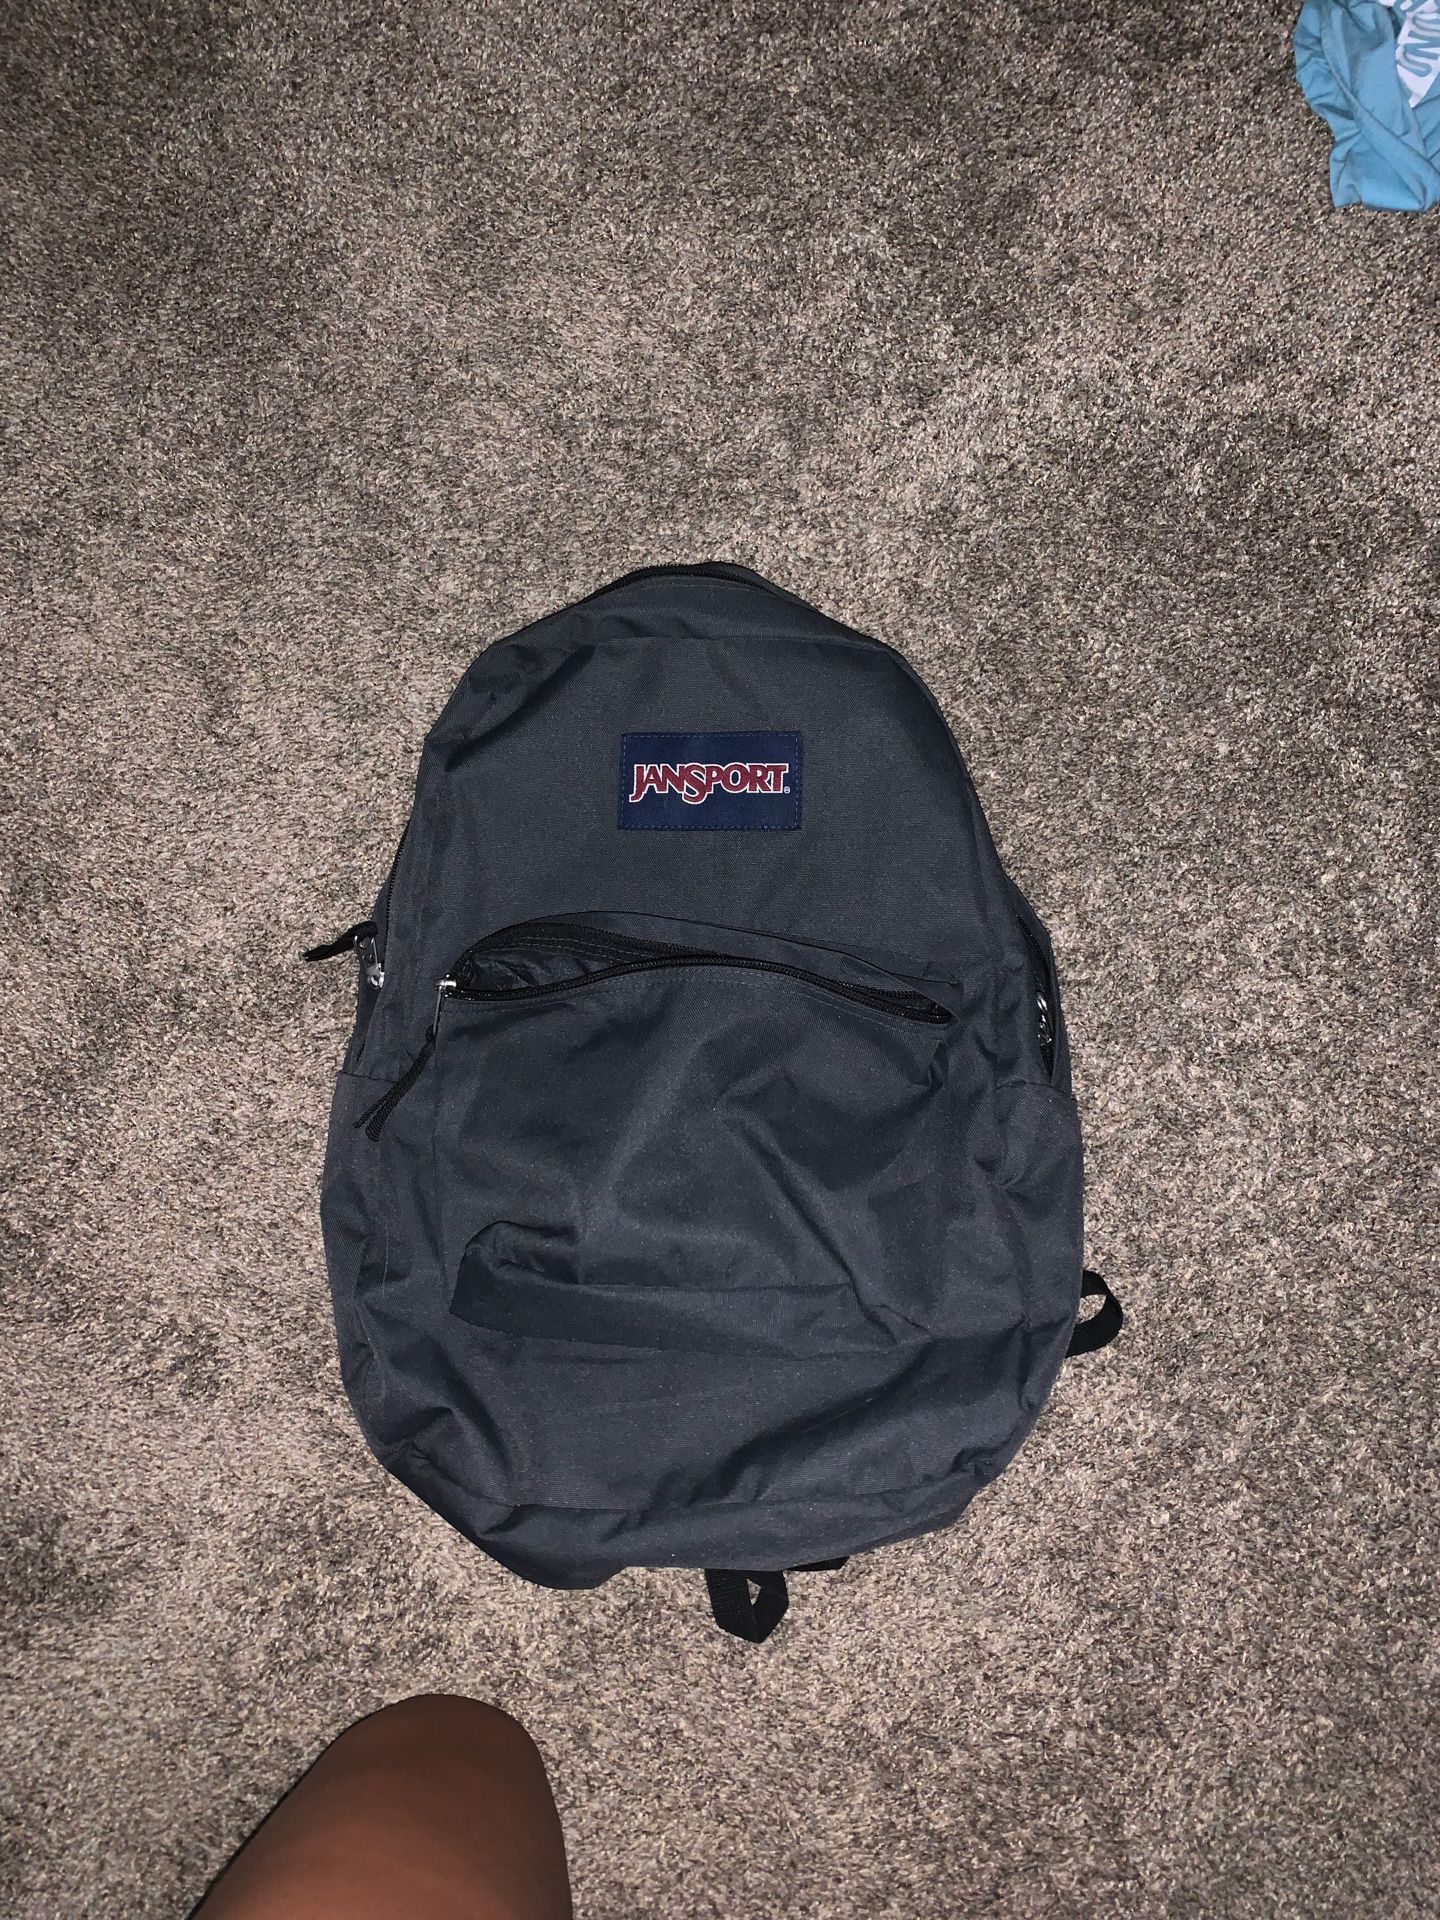 Jansport backpack, charcoal gray new